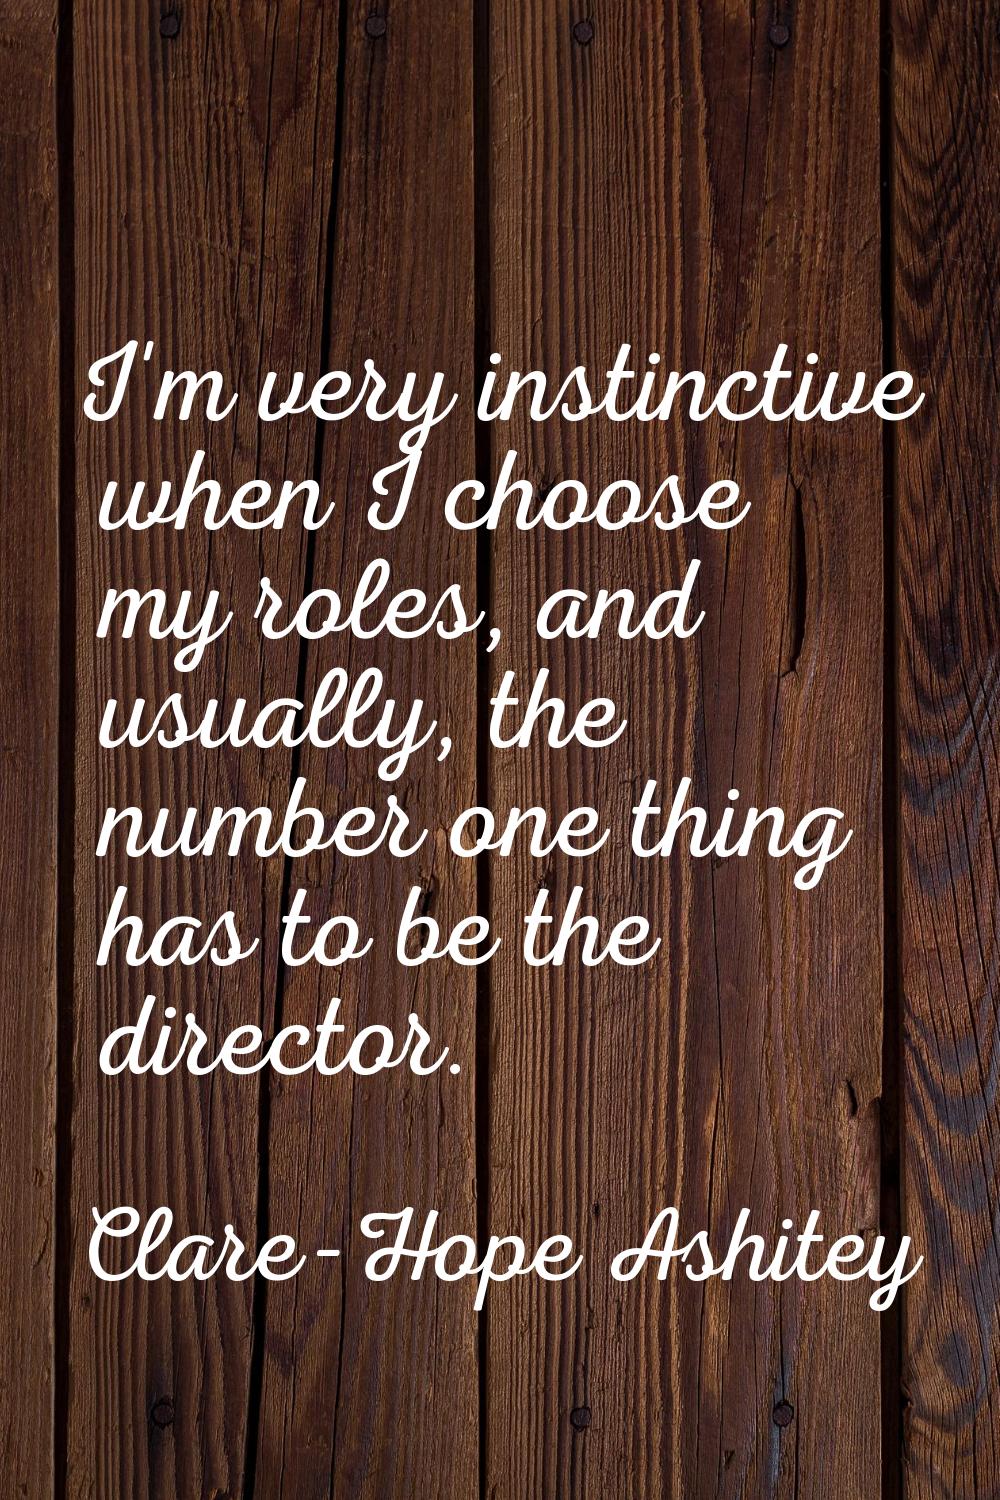 I'm very instinctive when I choose my roles, and usually, the number one thing has to be the direct